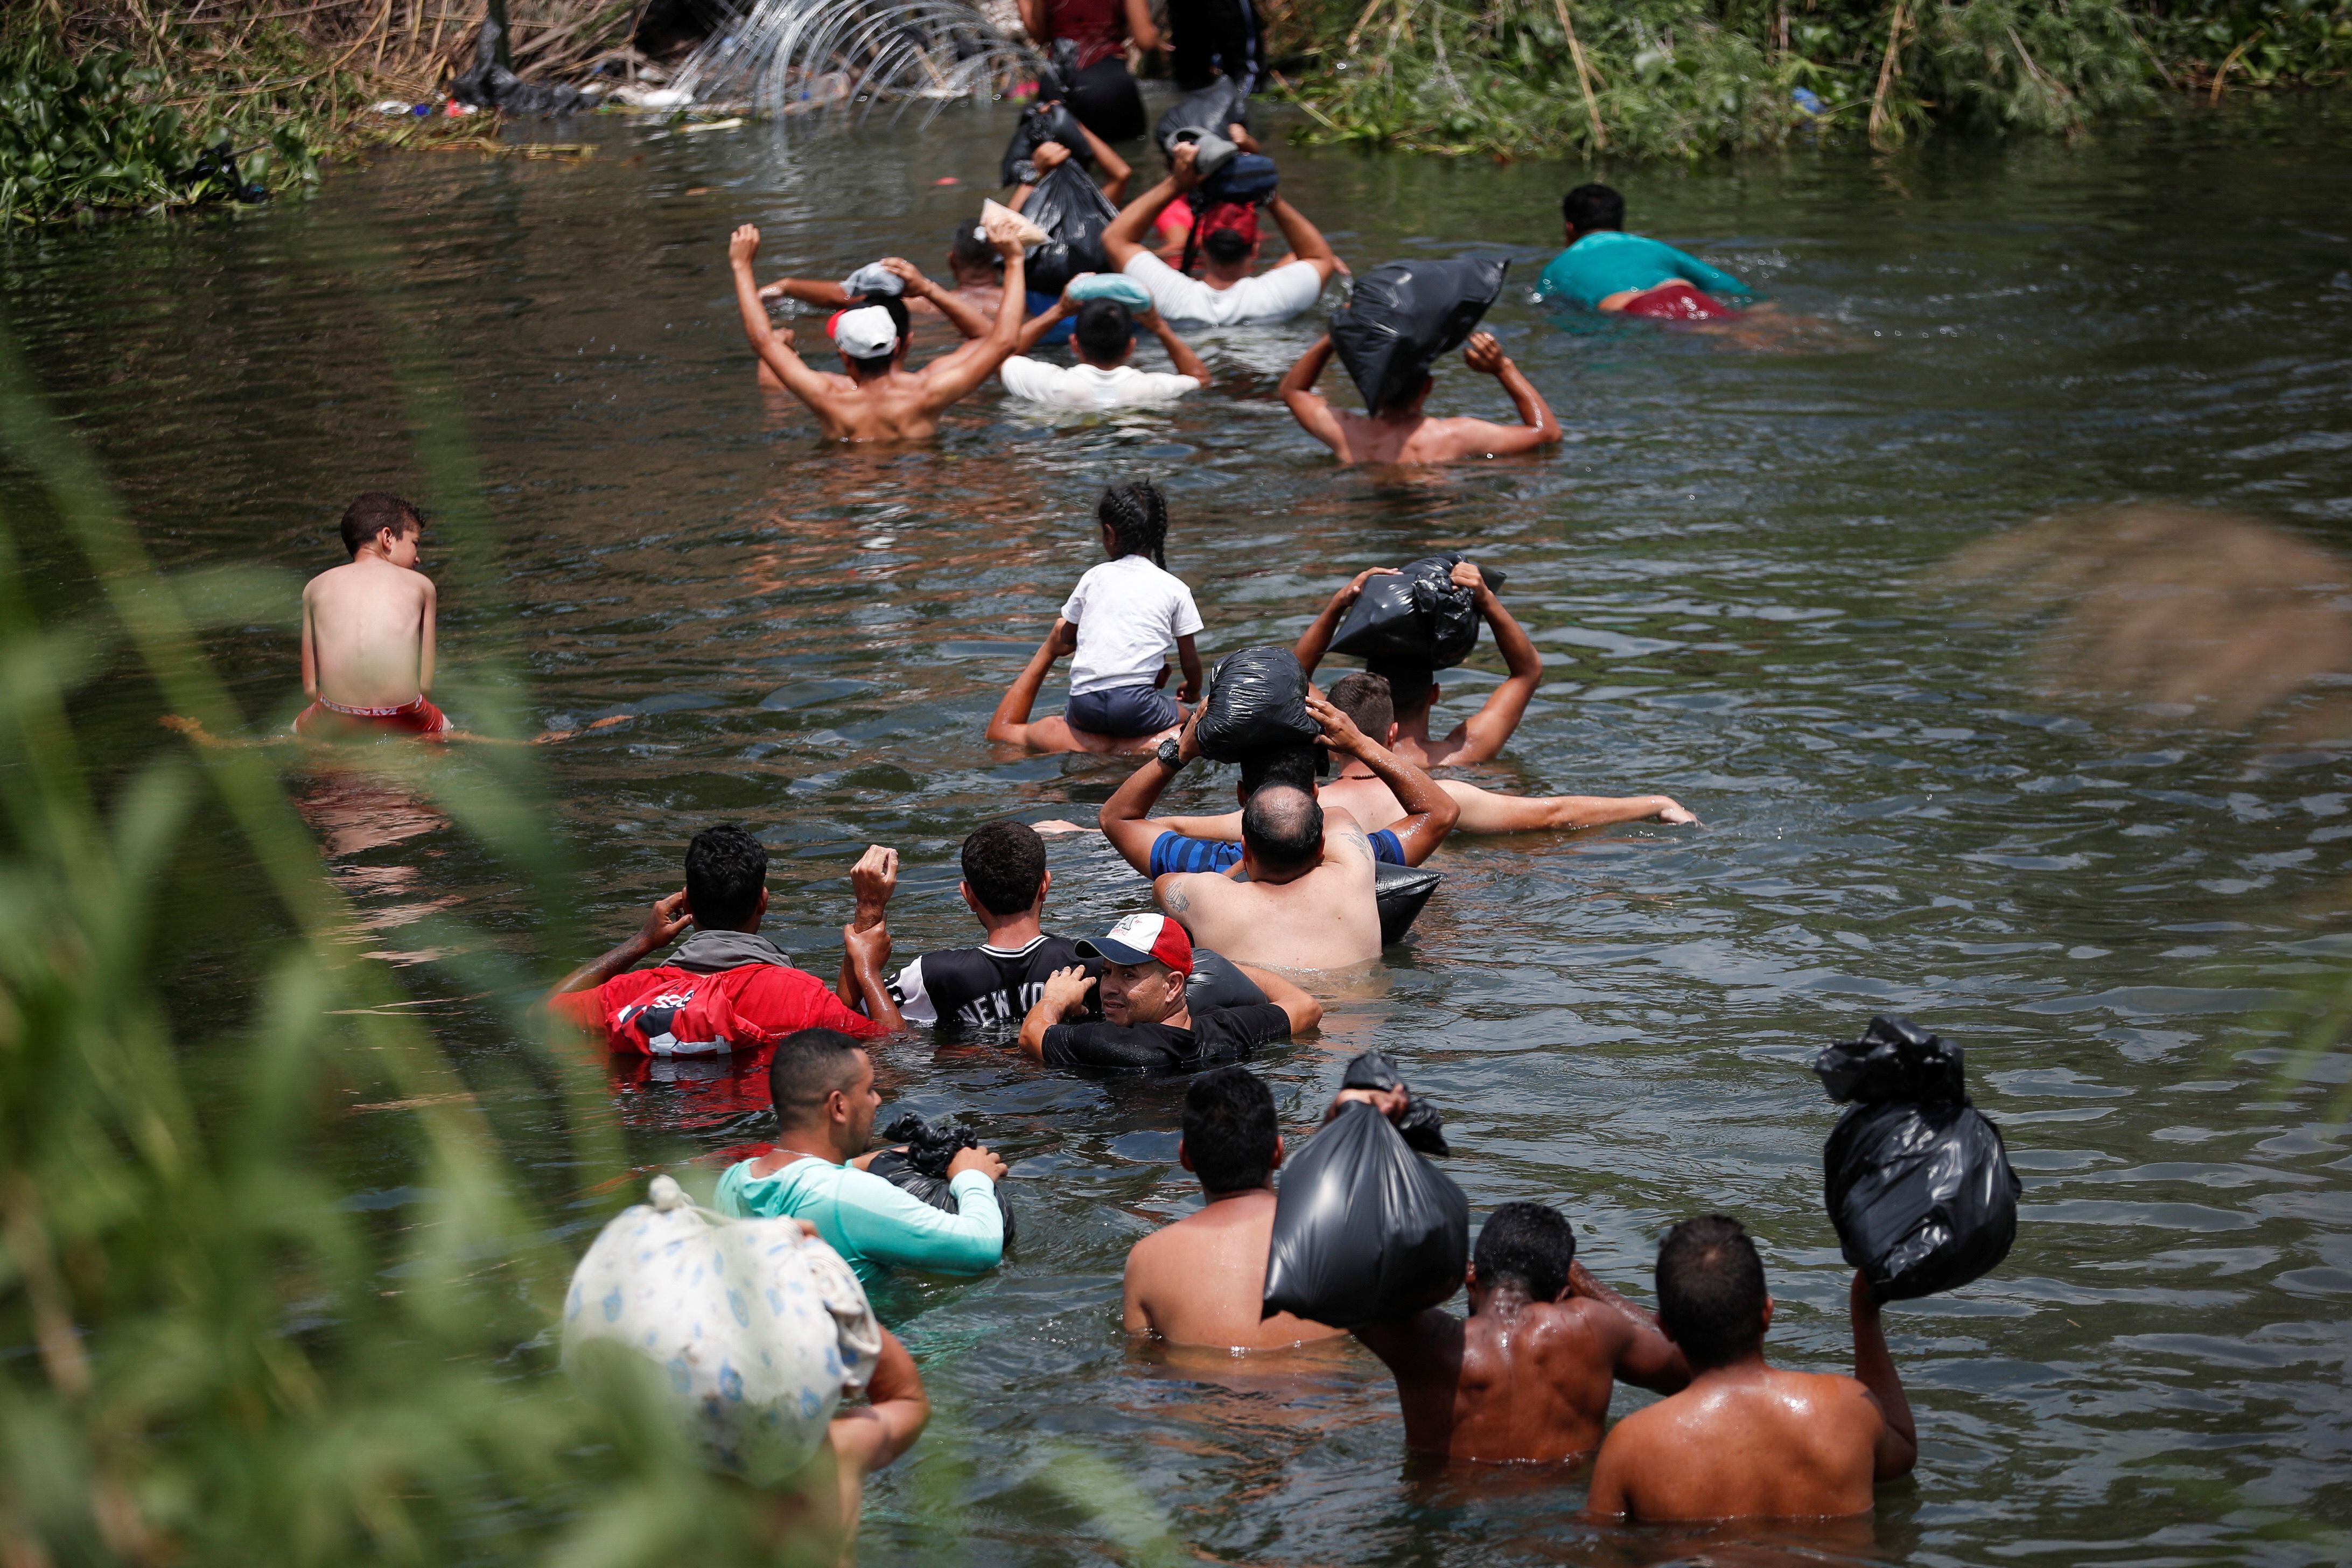 Migrants cross the Rio Bravo river to turn themselves in to U.S. Border Patrol agents before the lifting of Title 42, in Matamoros, Mexico May 11, 2023. REUTERS/Daniel Becerril